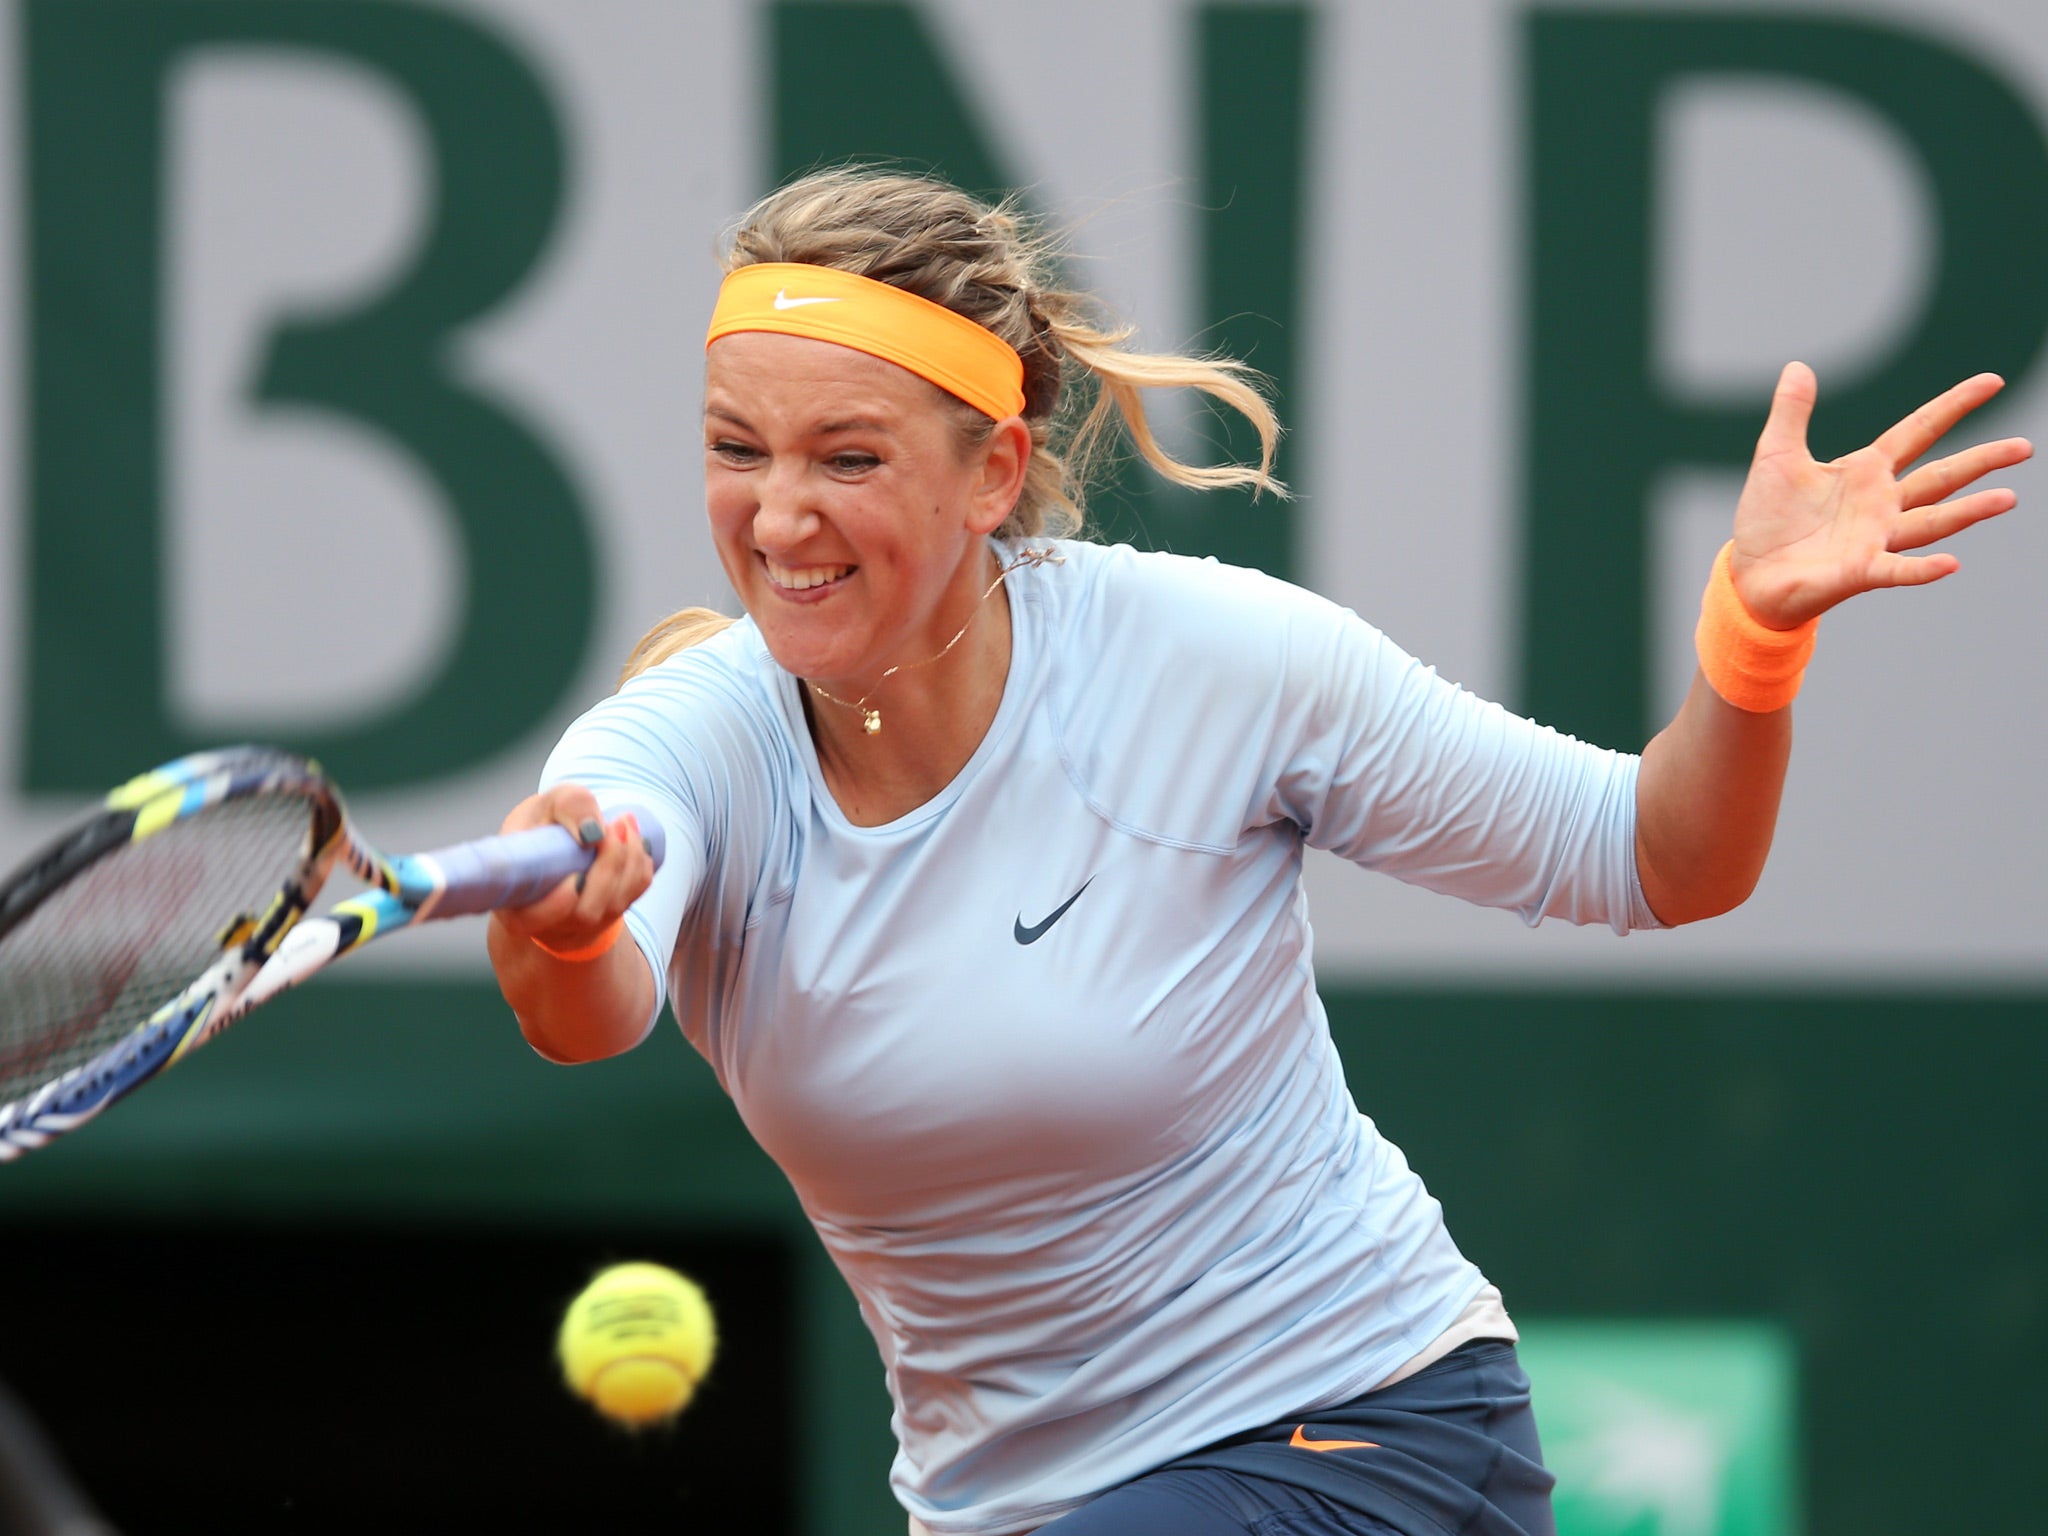 Victoria Azarenka of Belarus plays a forehand in her Women's Singles match against Francesca Schiavone of Italy during day nine of the French Open at Roland Garros